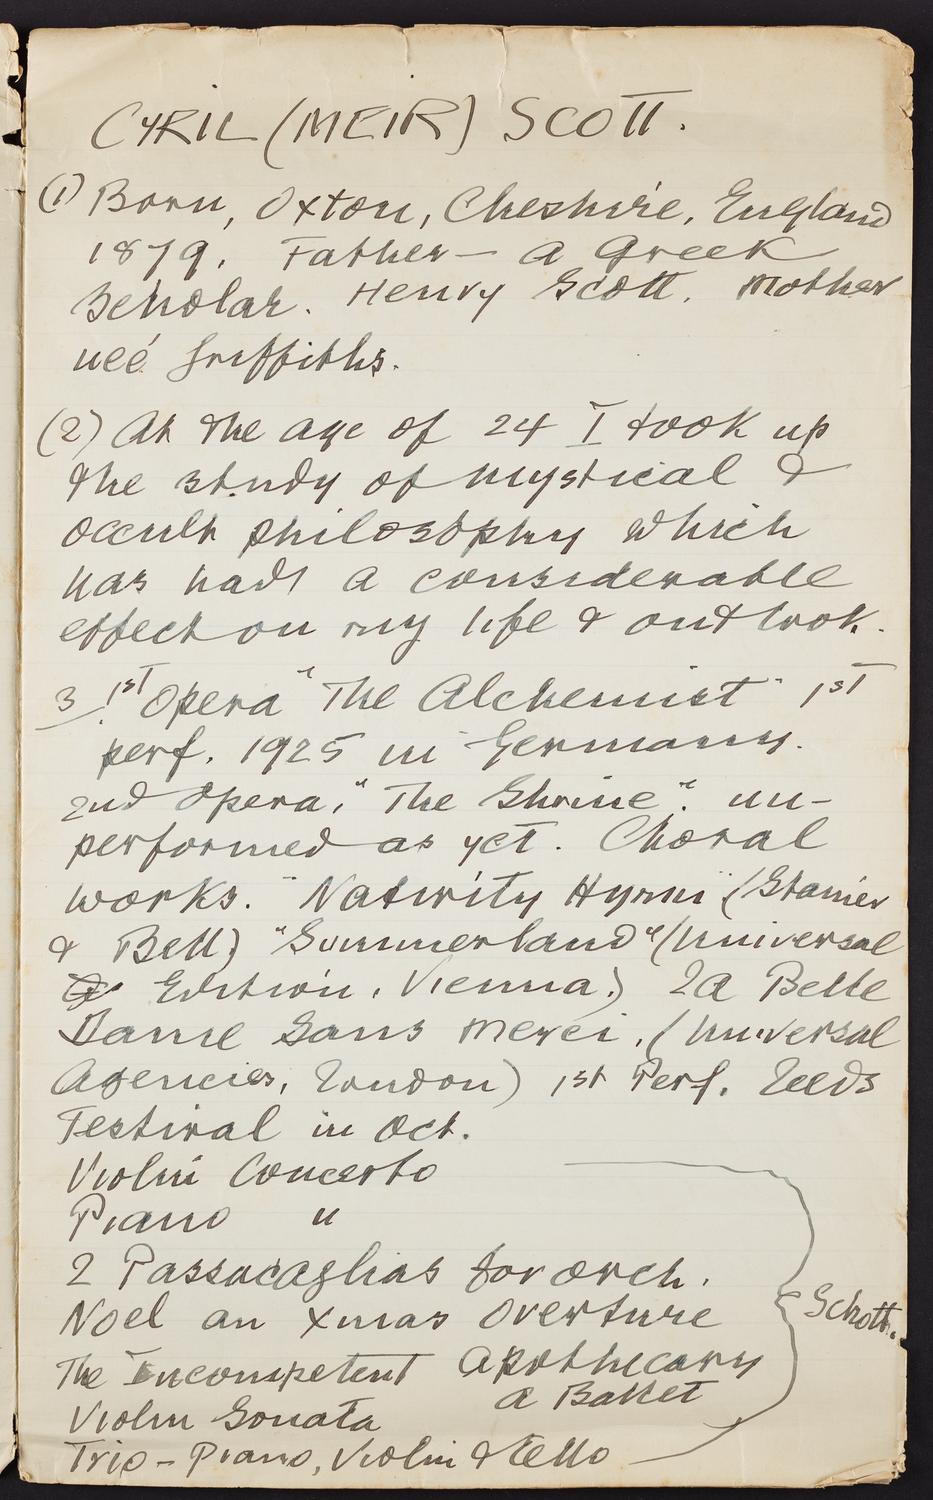 Correspondence from Cyril Scott to David Ewen, page 3 of 8